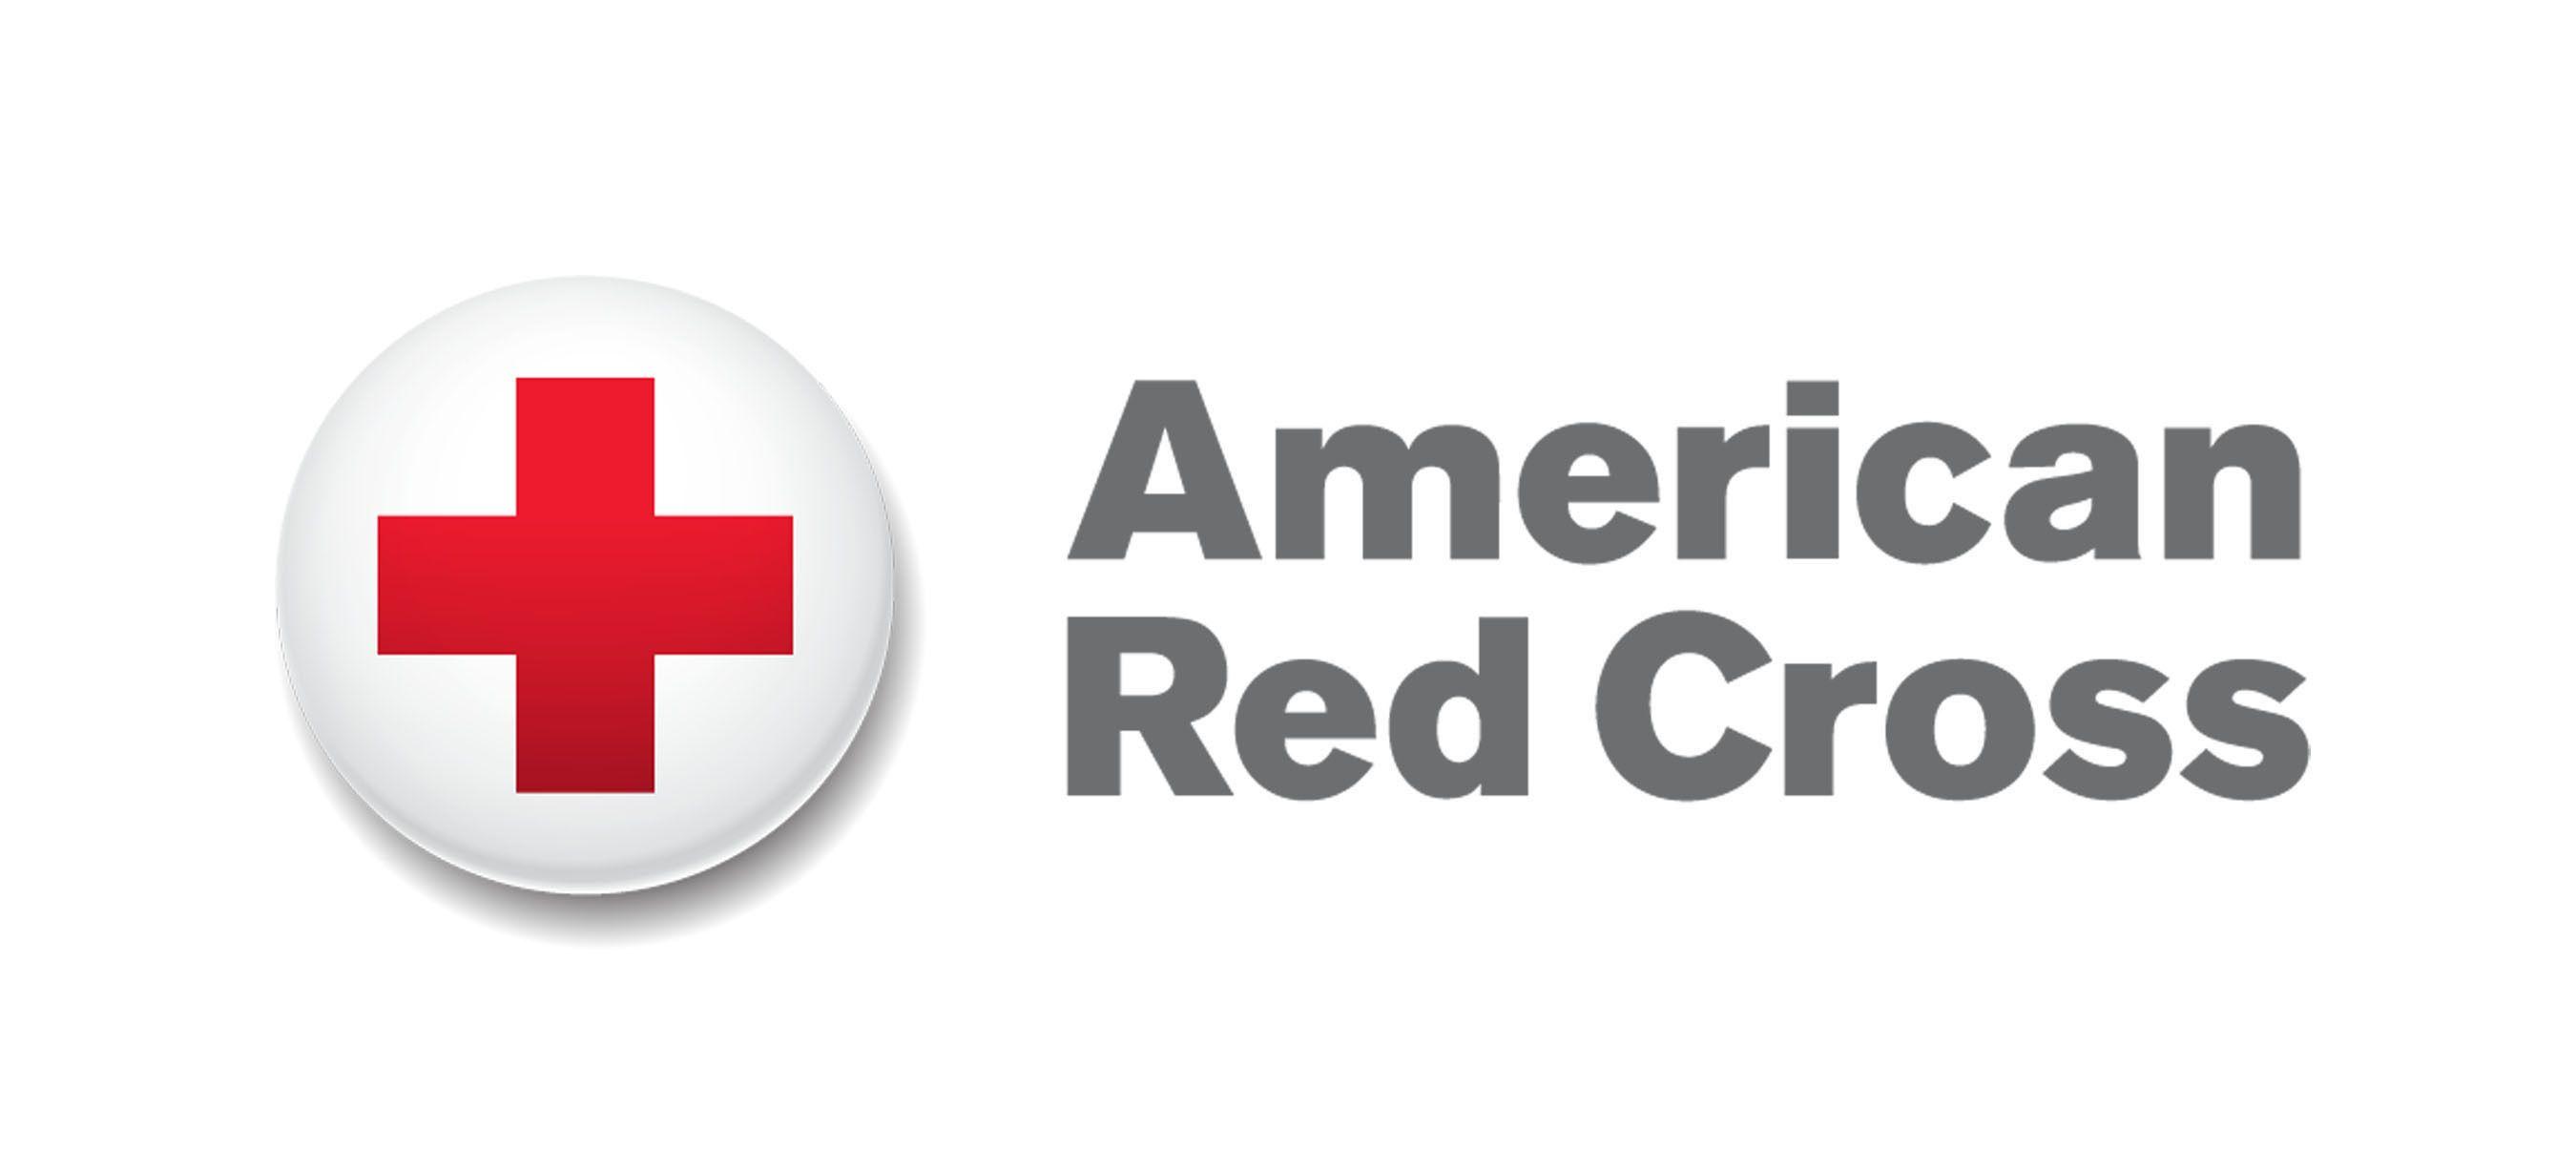 American Red Cross Button Logo - AMERICAN RED CROSS LOGO. LeChase Construction Services, LLC